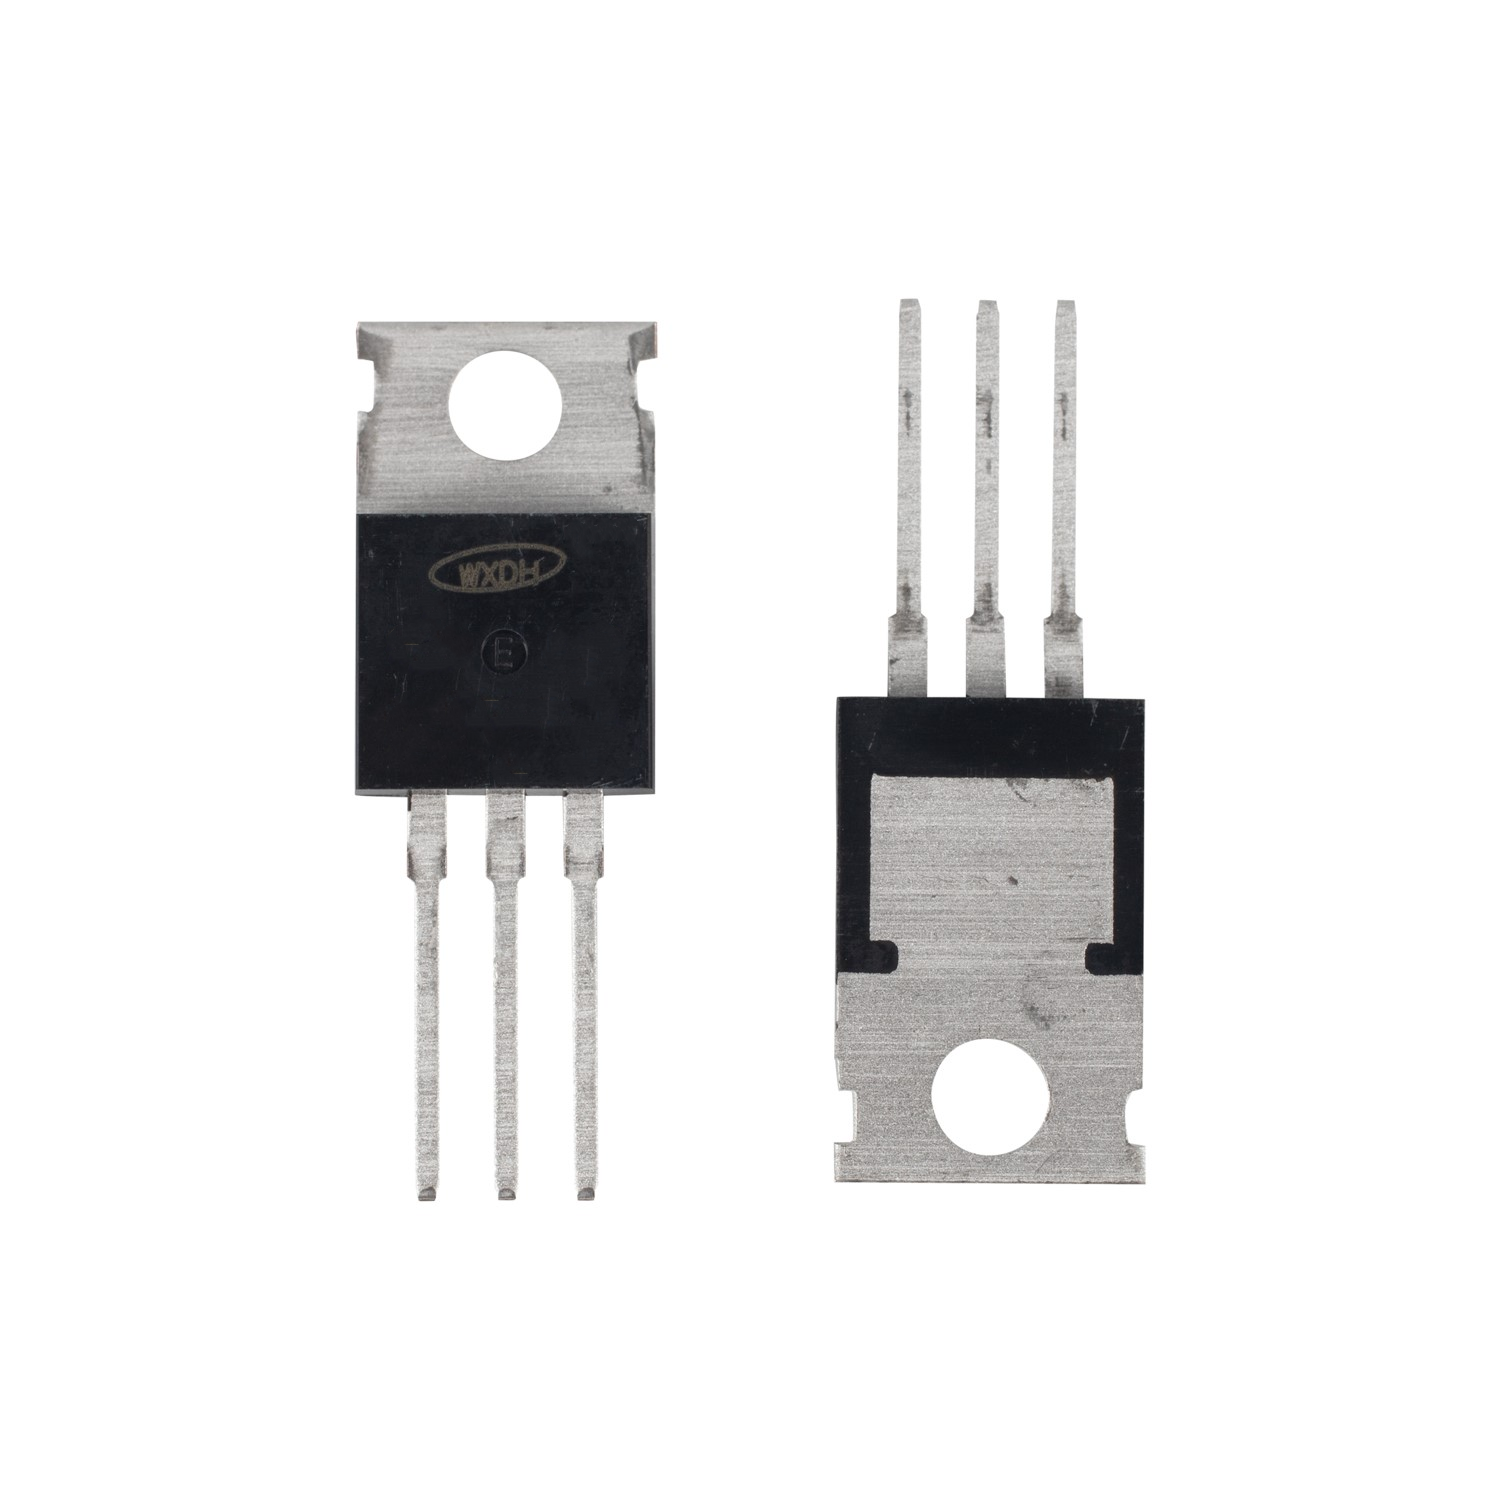  N-channel Enhancement Mode Power MOSFET 100A 85V